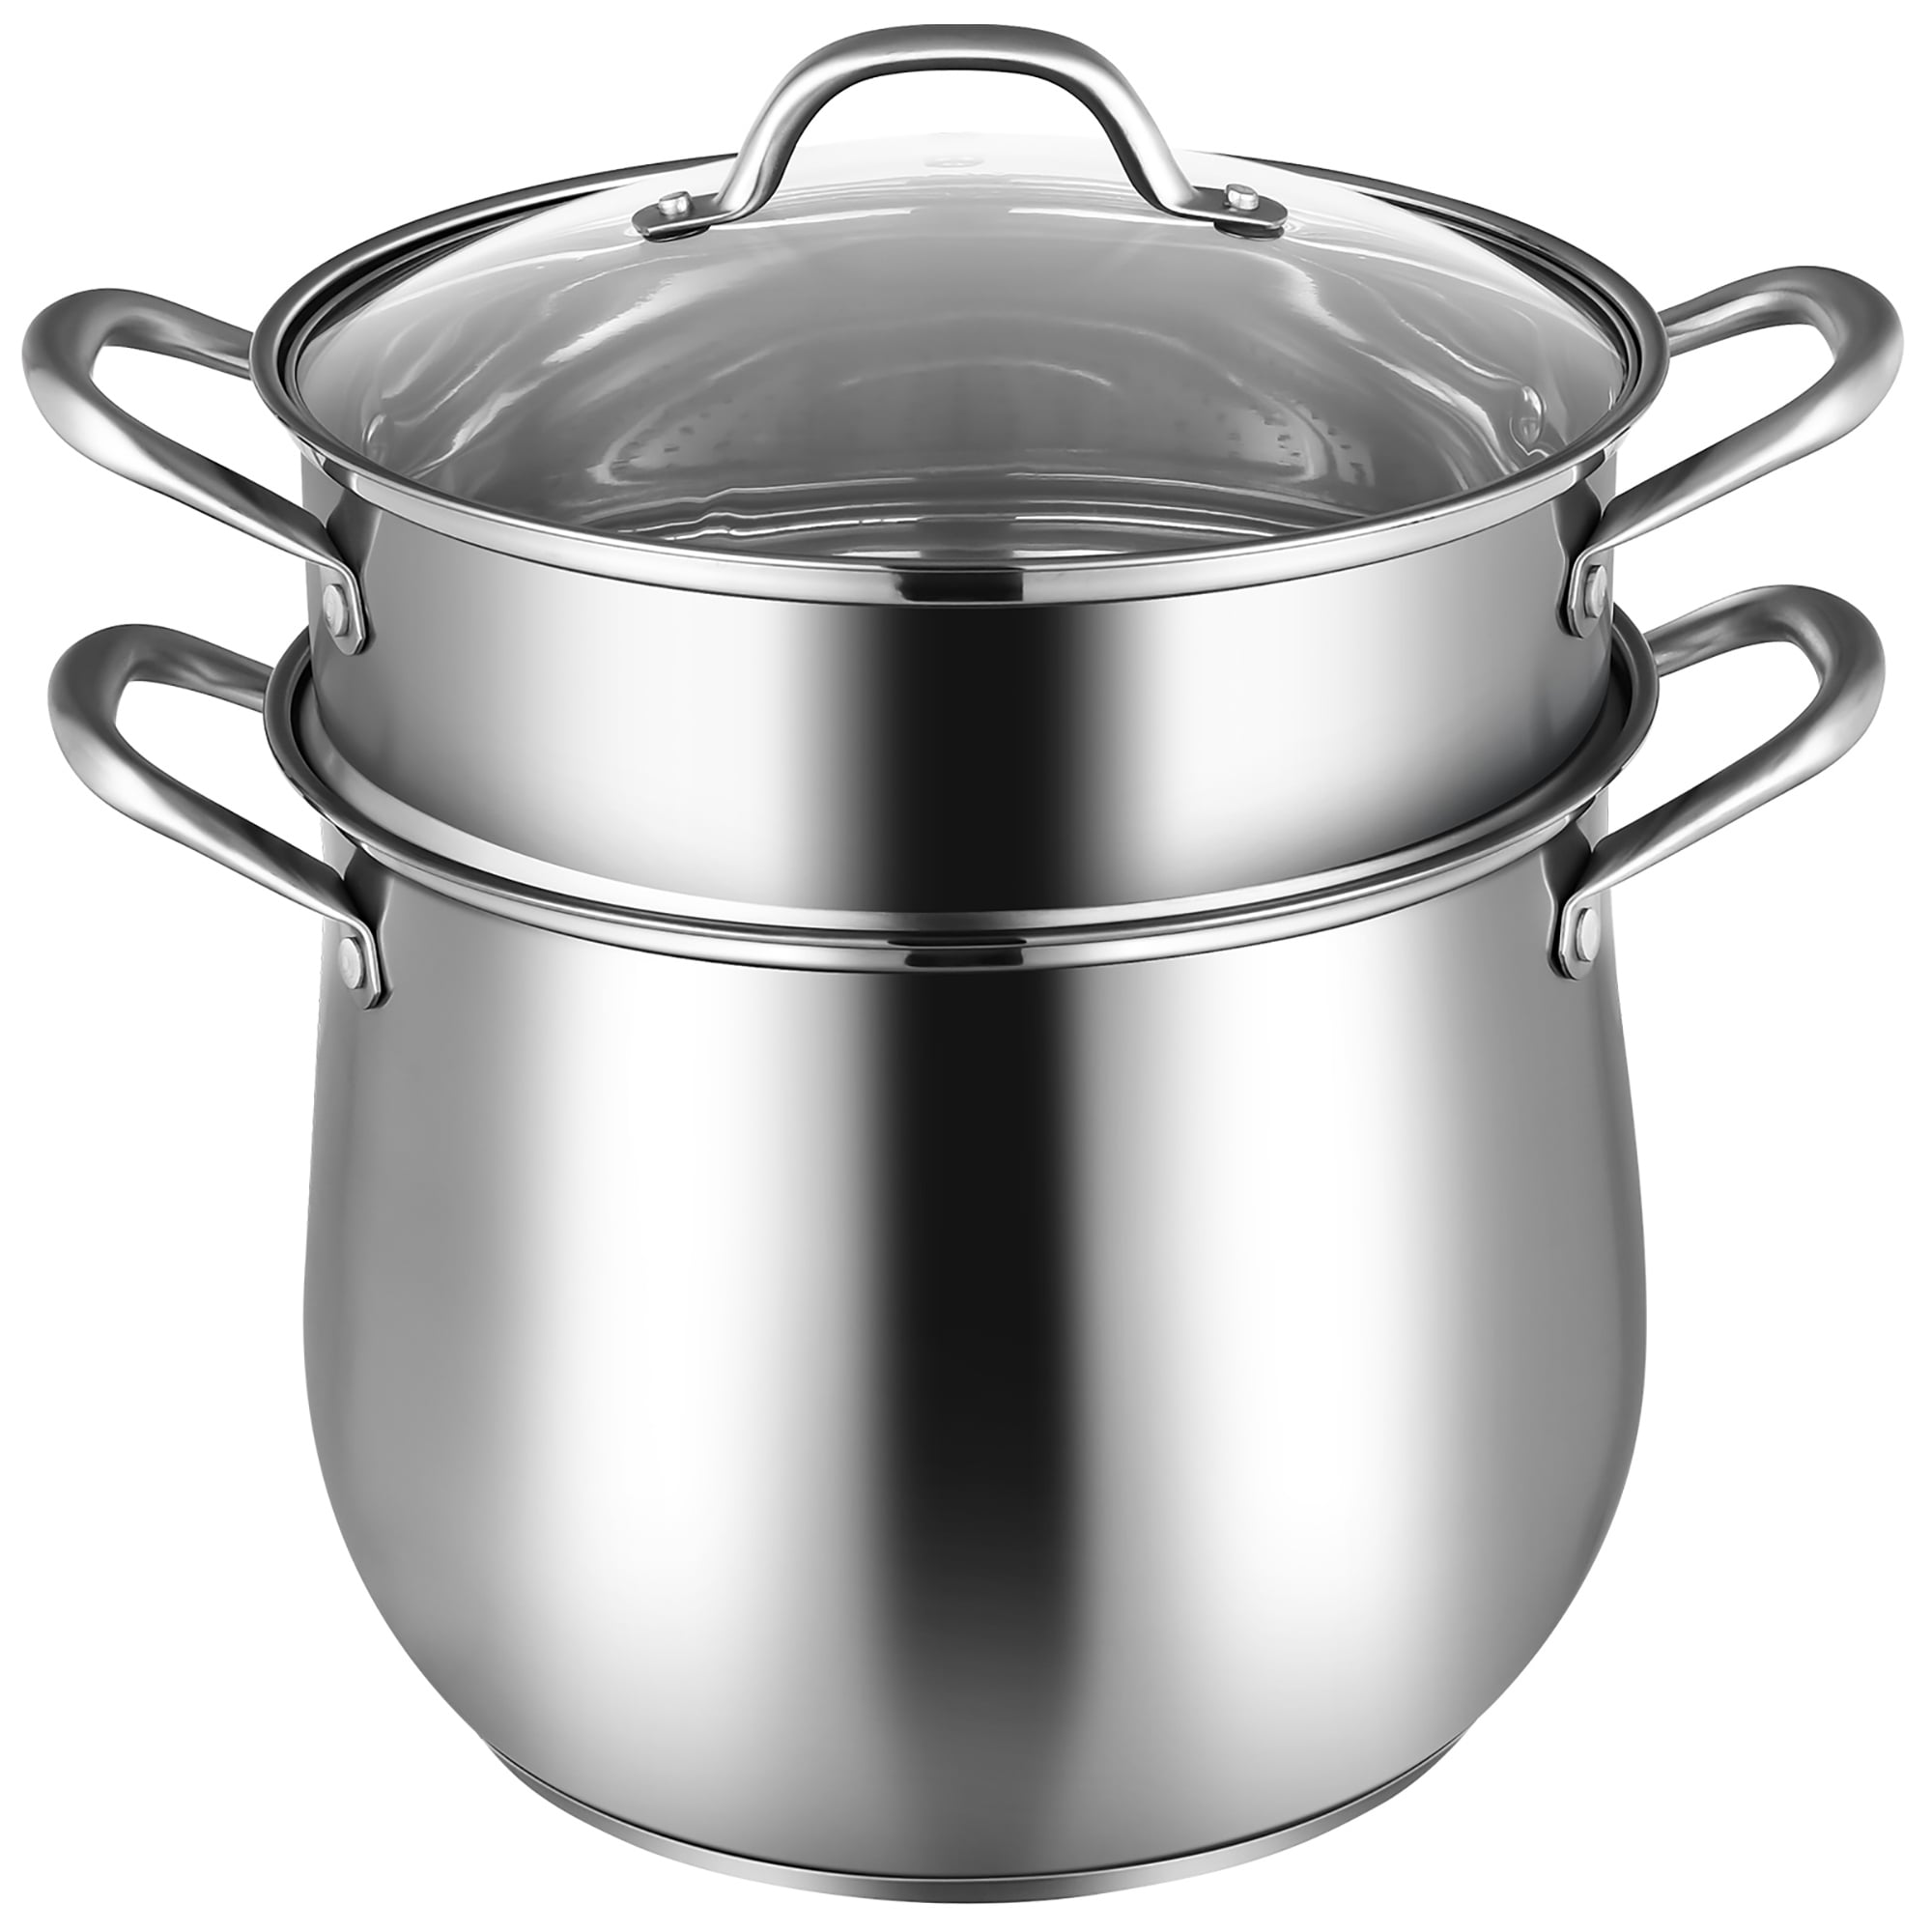 https://ak1.ostkcdn.com/images/products/is/images/direct/212fa9b47e702a1b05b96f268c17cb3feb14abf2/Costway-2-Tier-Steamer-Pot-Saucepot-Stainless-Steel-w--Tempered-Glass.jpg